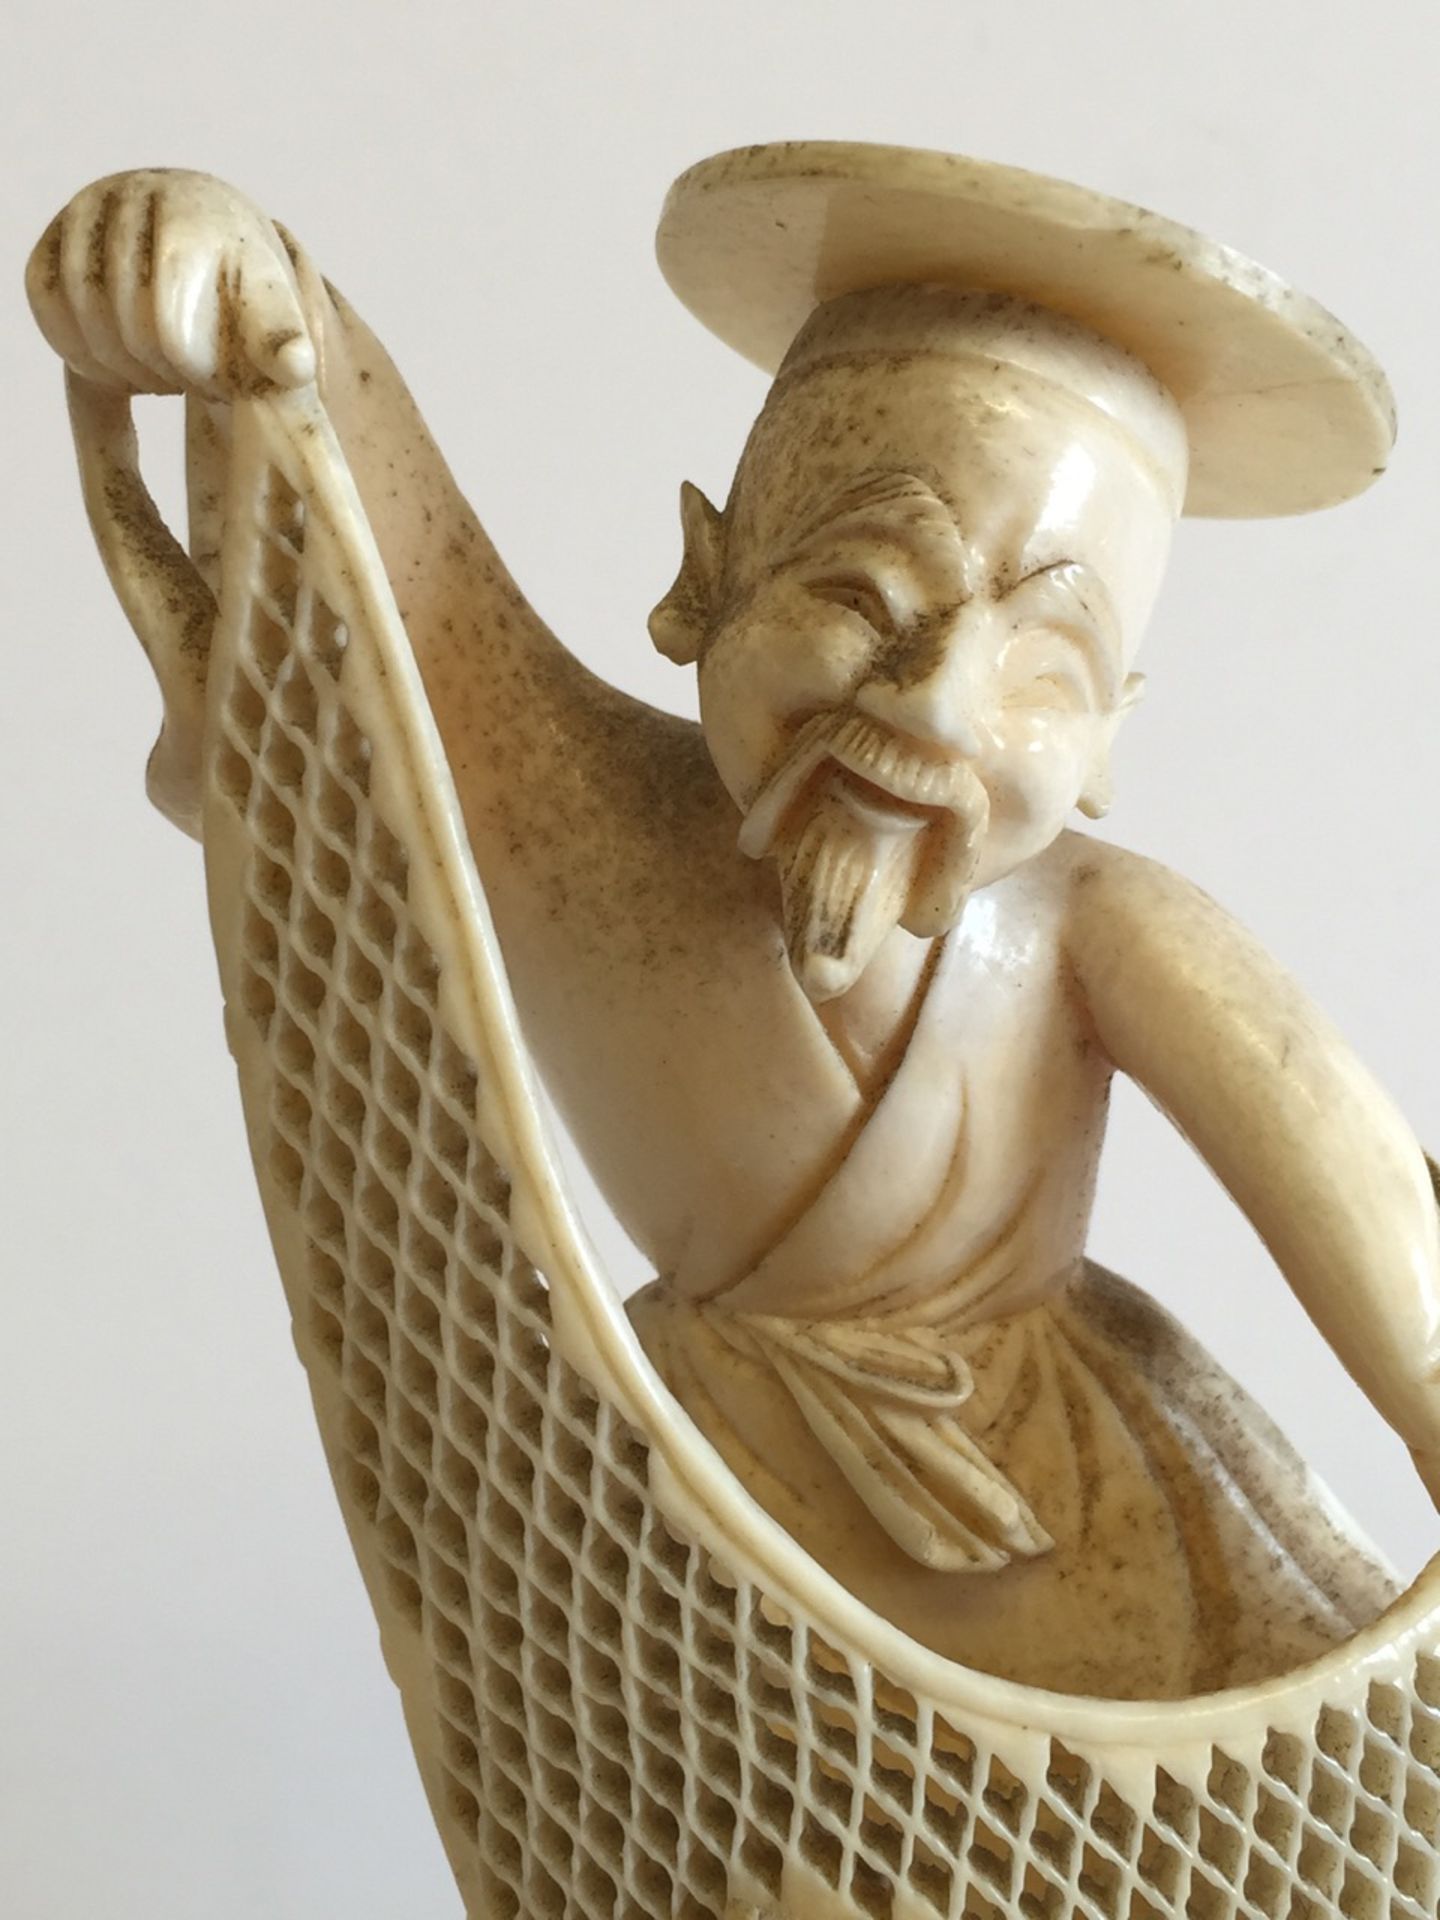 A Meiji Period Japanese Ivory Carving of a Fisherman - Image 5 of 7